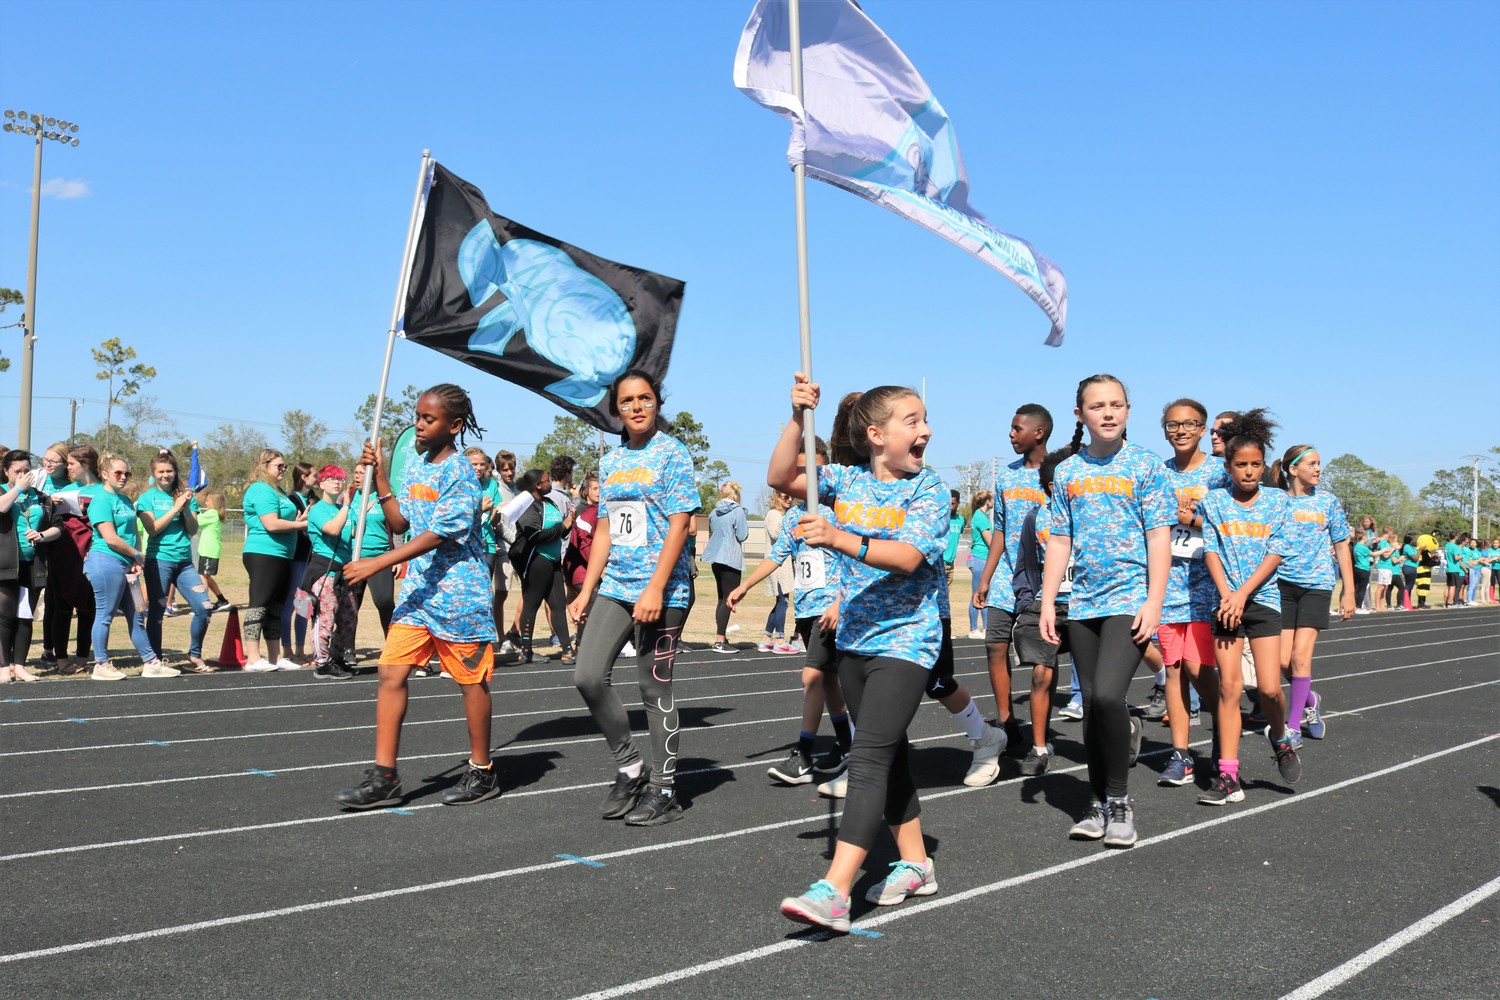 Mason Elementary students march together in the 2018 Character Cup Parade of Champions.